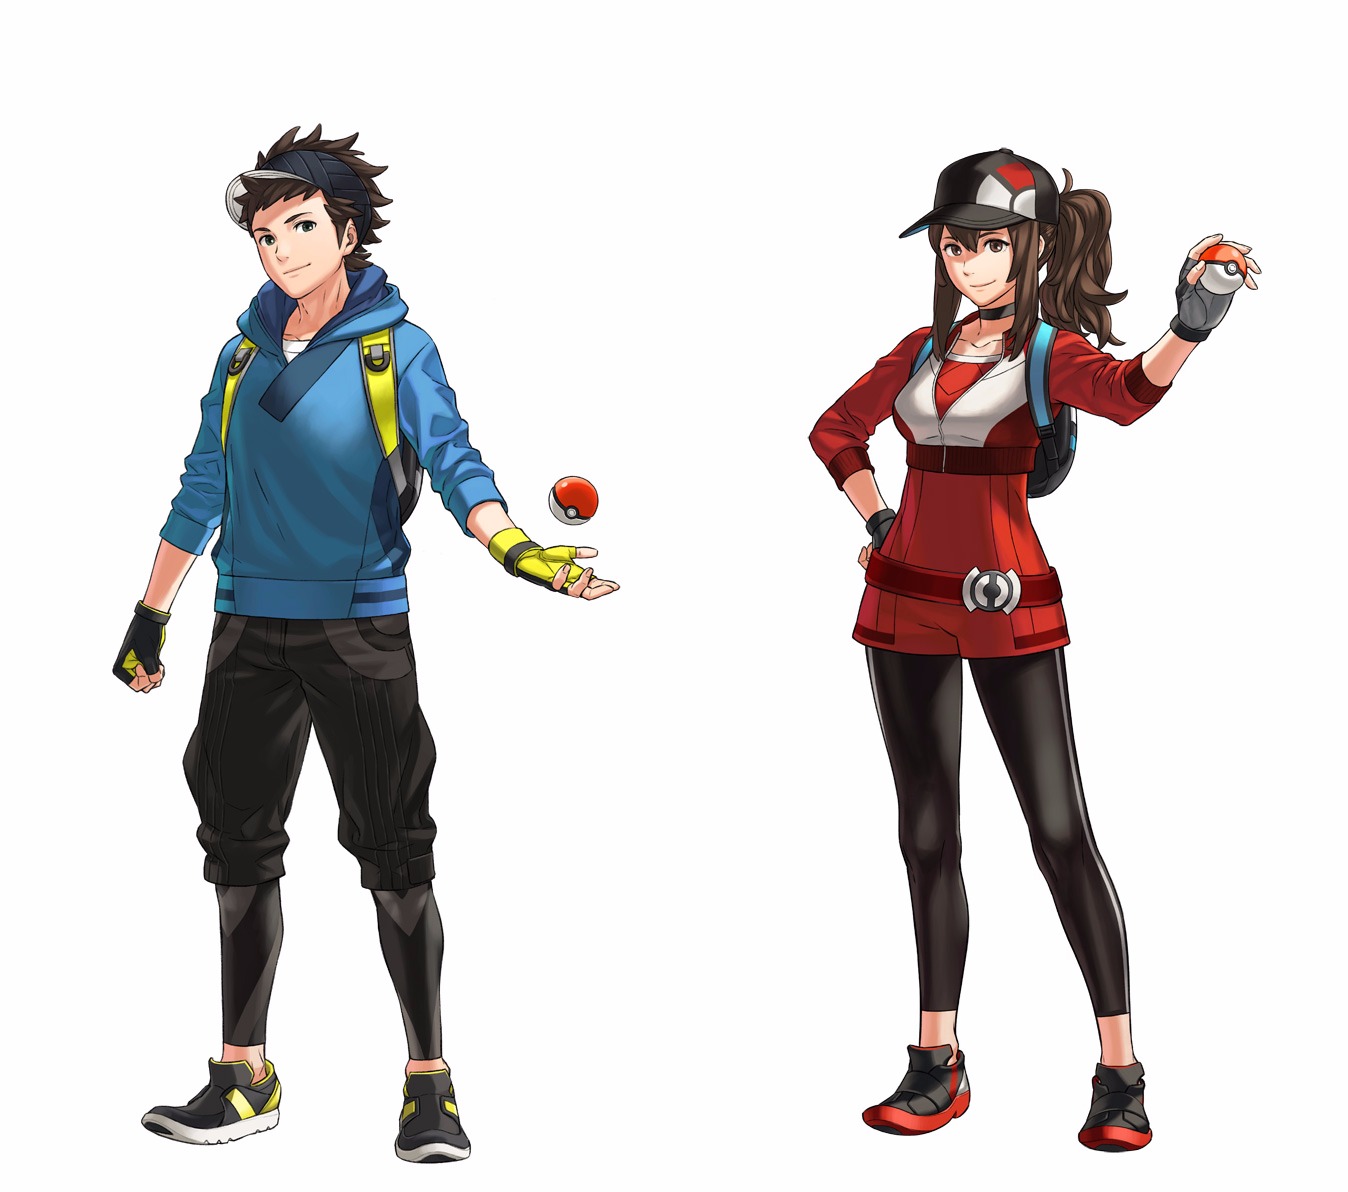 The images show some of the Pokemon added to the game, evolution process, a...